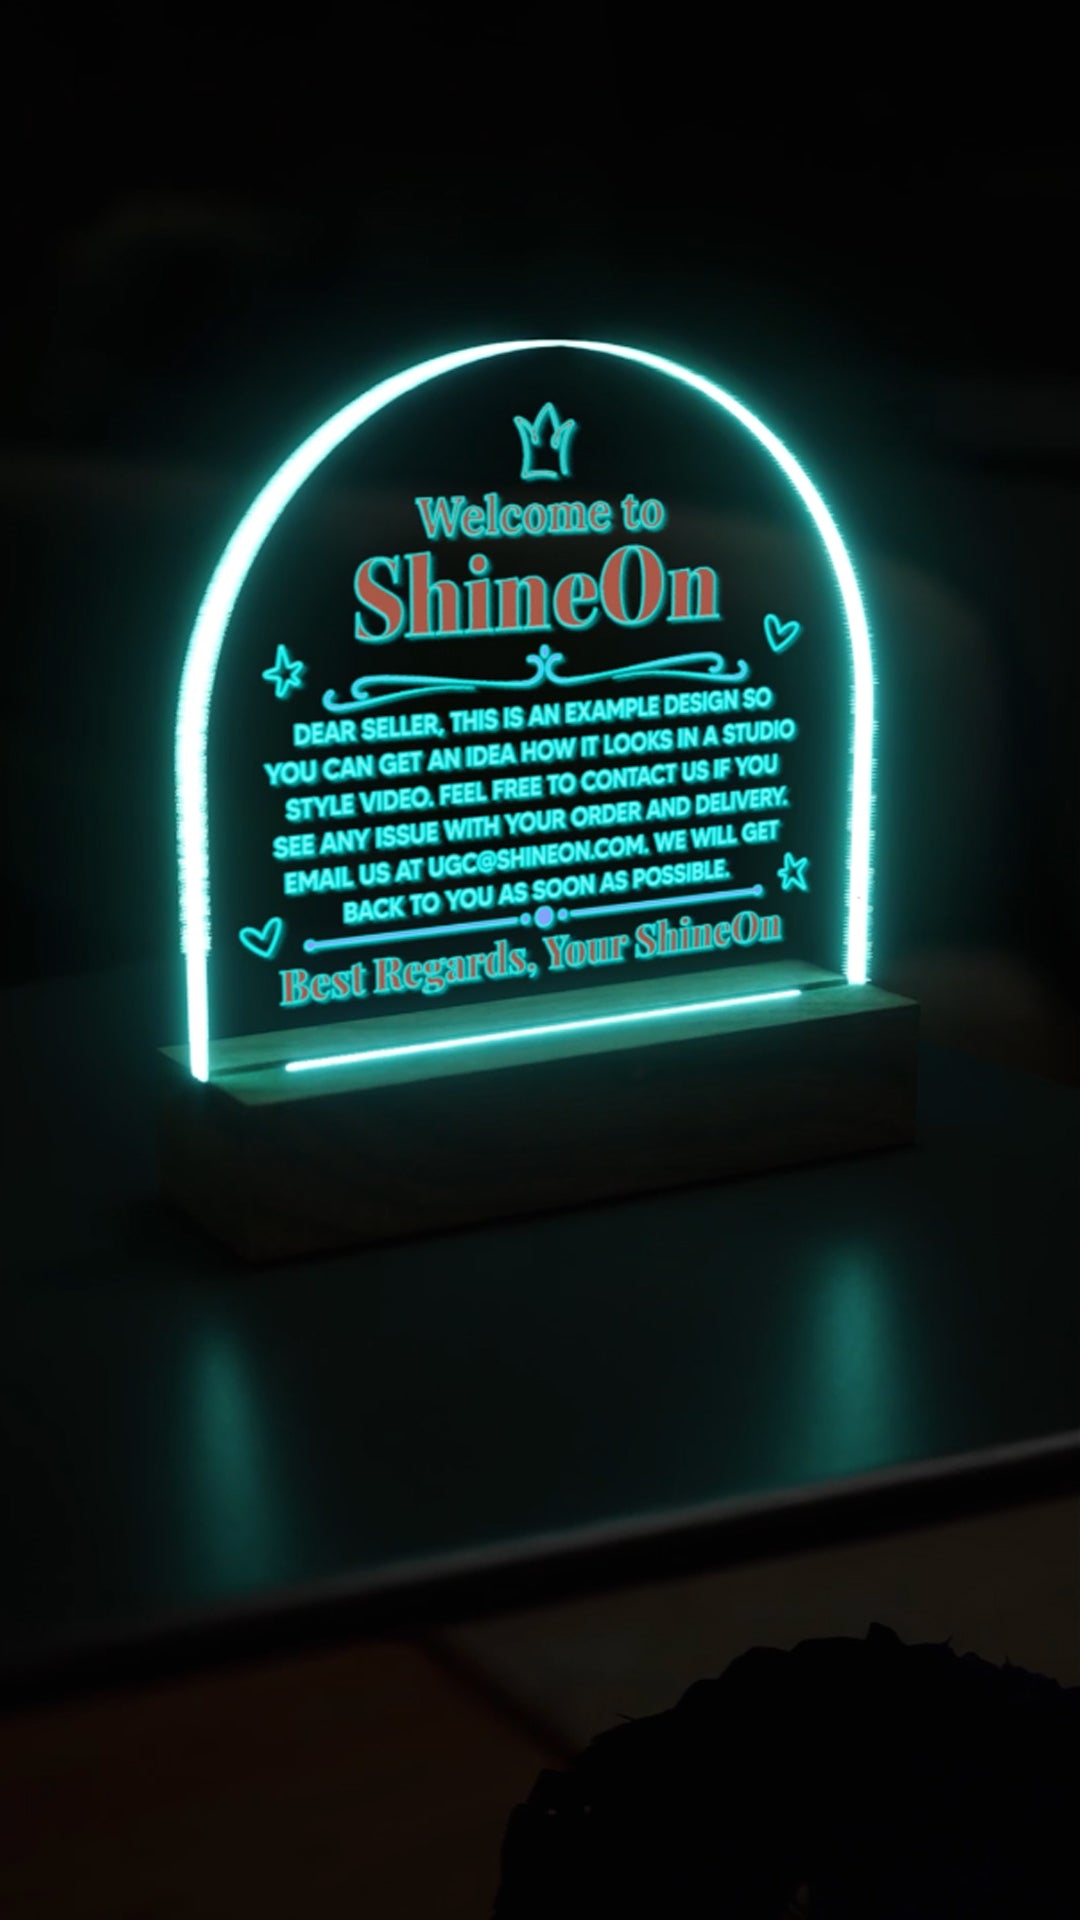 Acrylic Dome Plaque Colored Print Studio Quality With Wooden Base LED RGB - Indoor Scene 3 - 3D